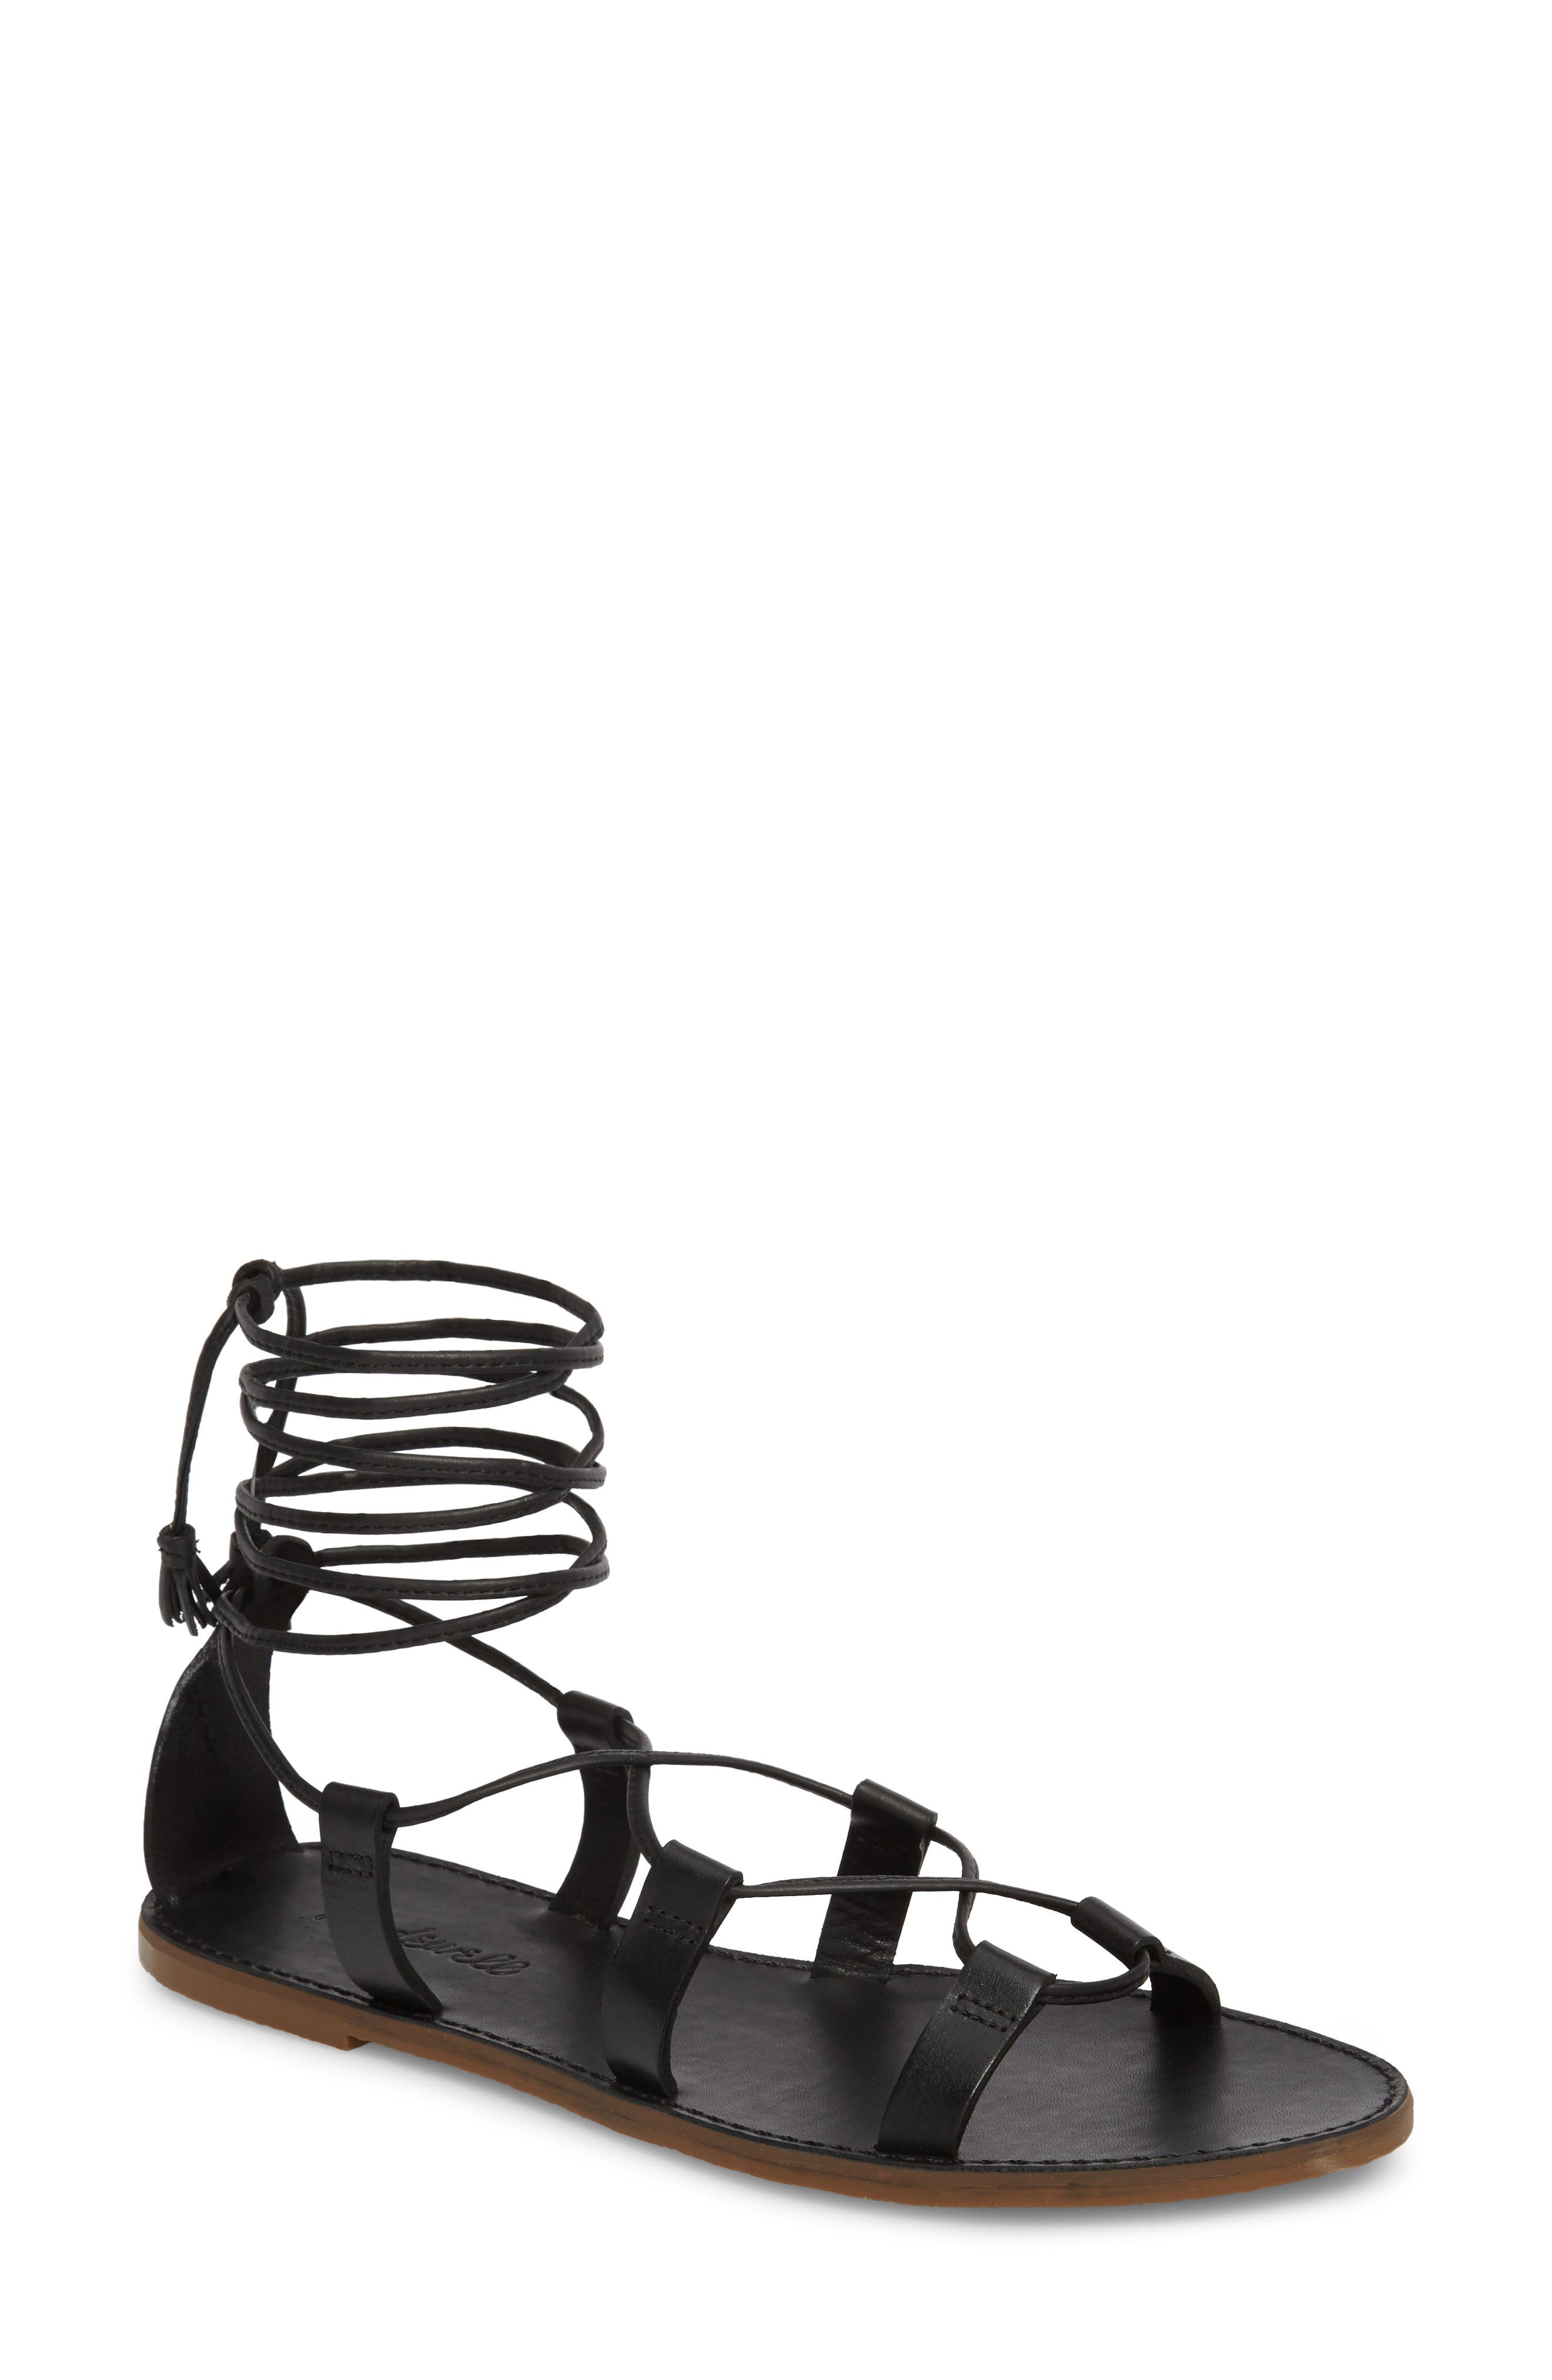 Madewell The Boardwalk Lace-Up Sandal 